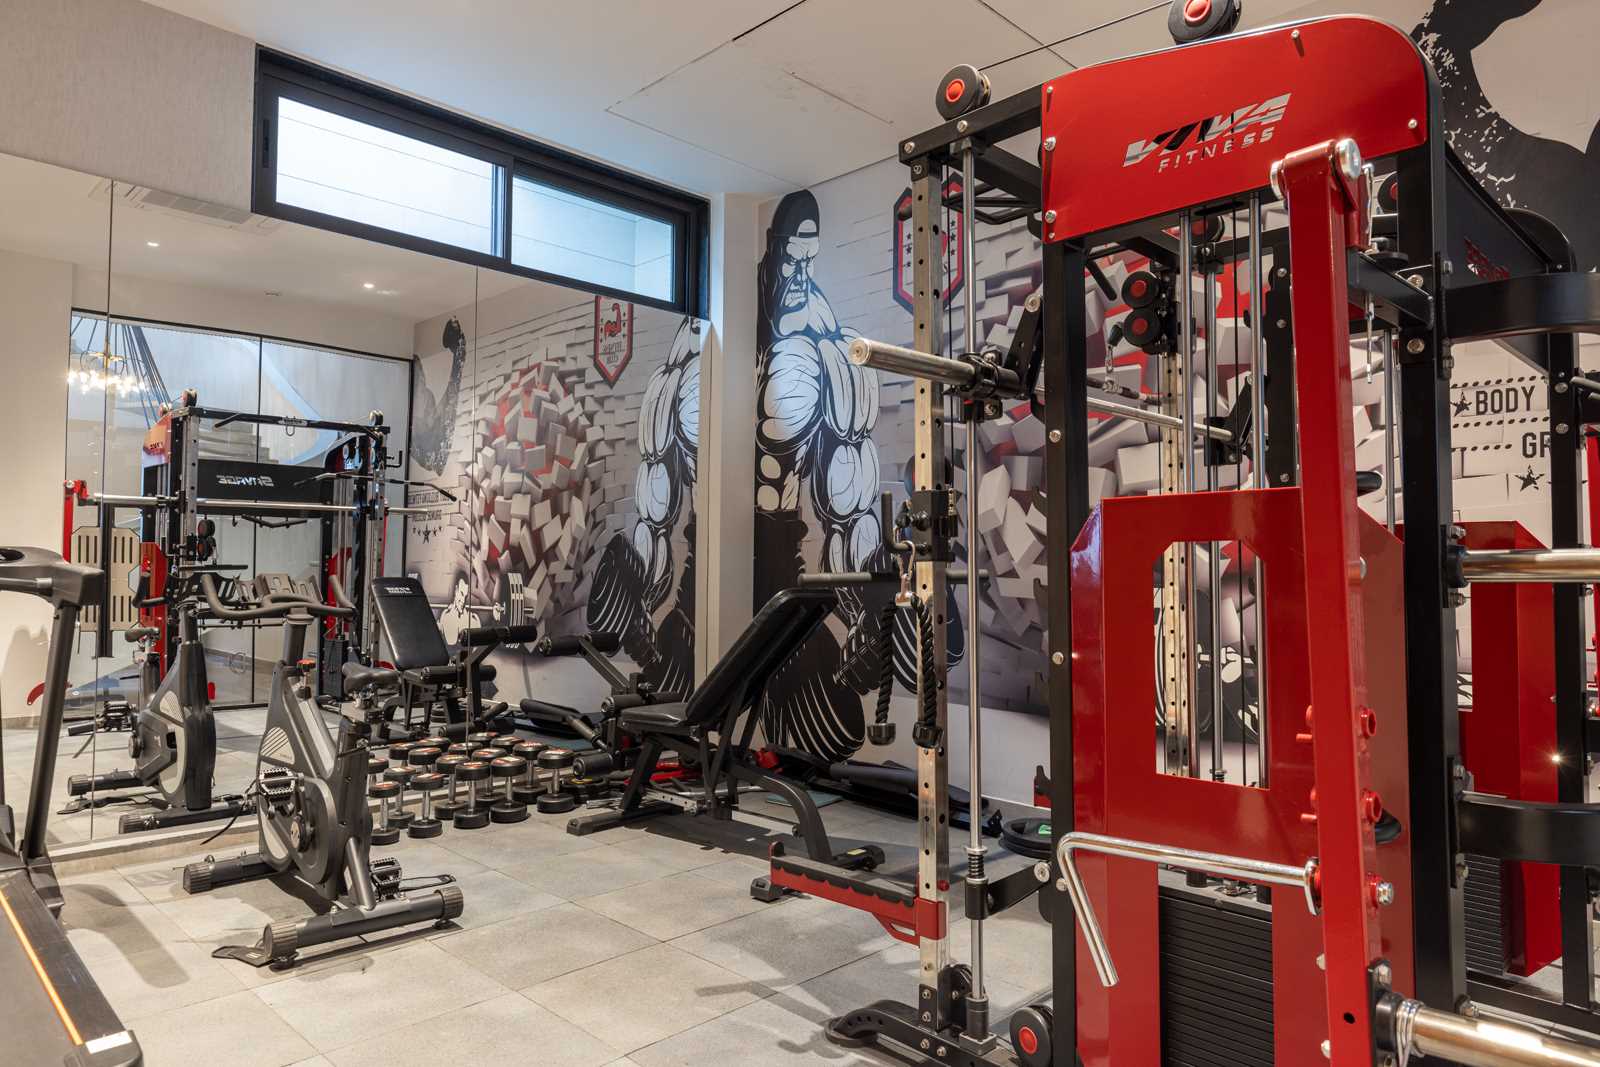 In this home gym, black and red are the chosen colors, and a large mural covers the wall.